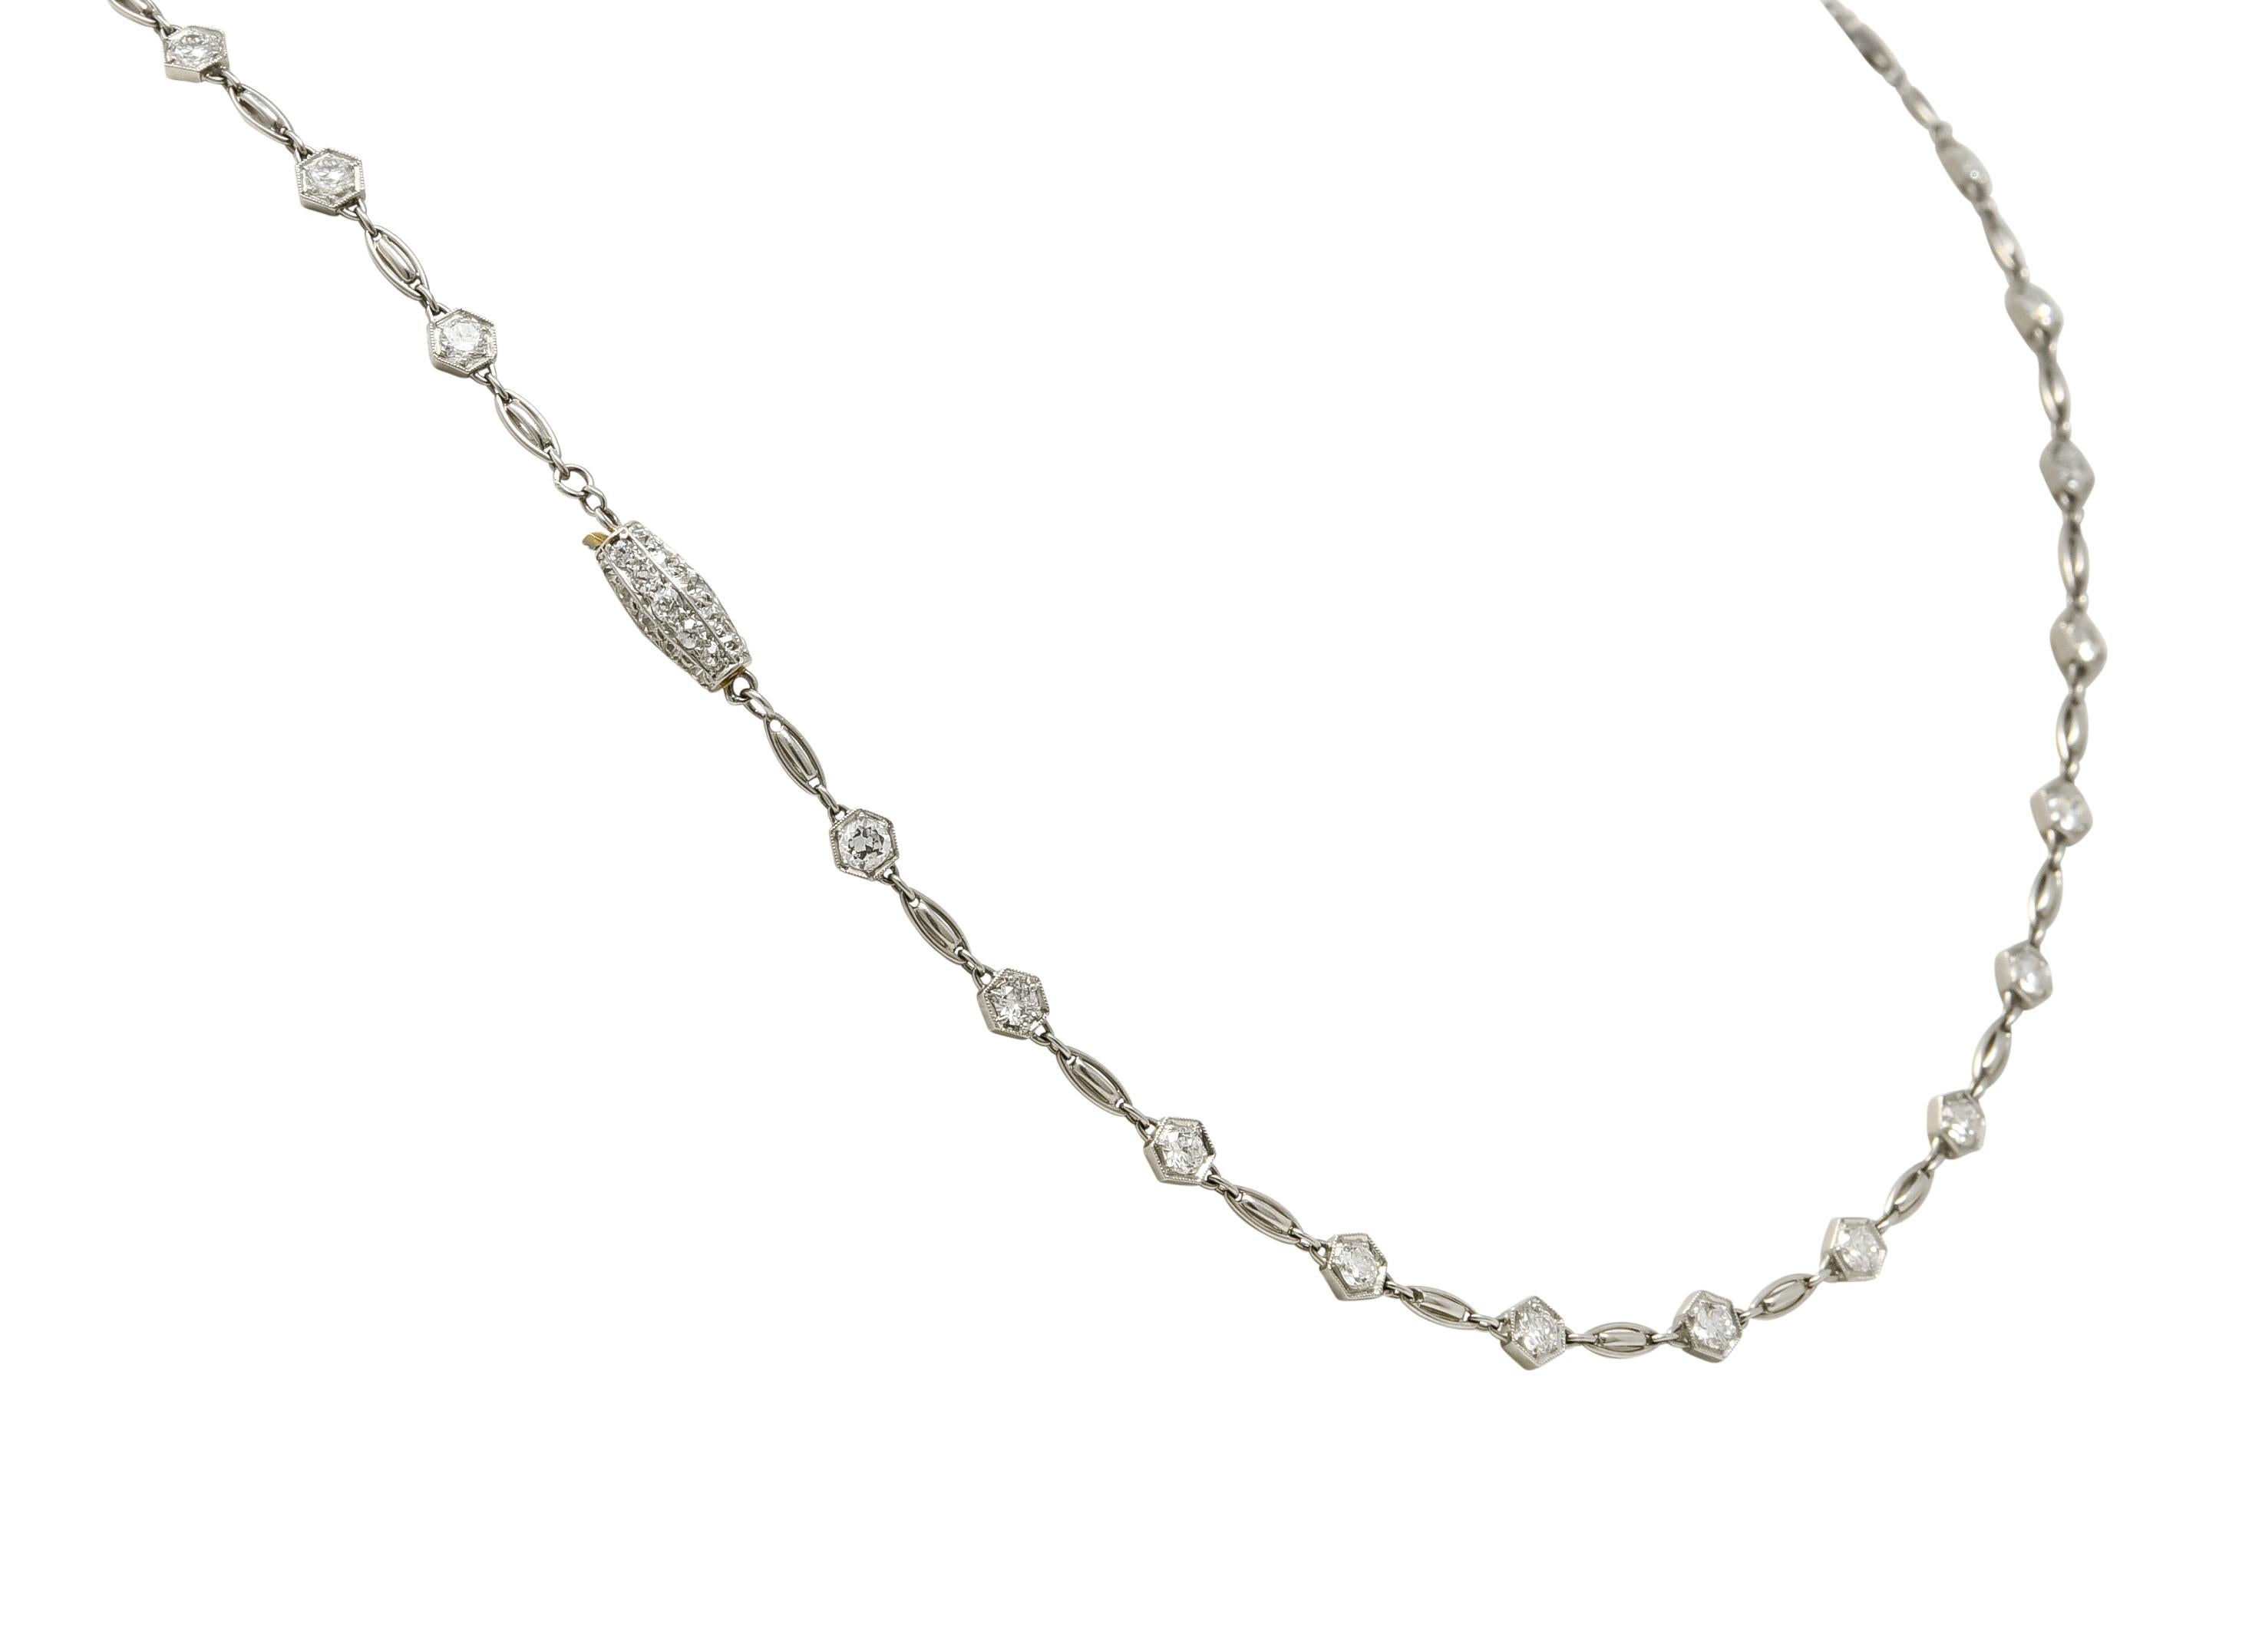 Link style necklace is comprised of elongated cushion links alternating with hexagonal millegrain links, completed by a pavé barrel clasp

Set throughout by old European cut diamonds weighing approximately 6.54 carats total, G/H color and VS